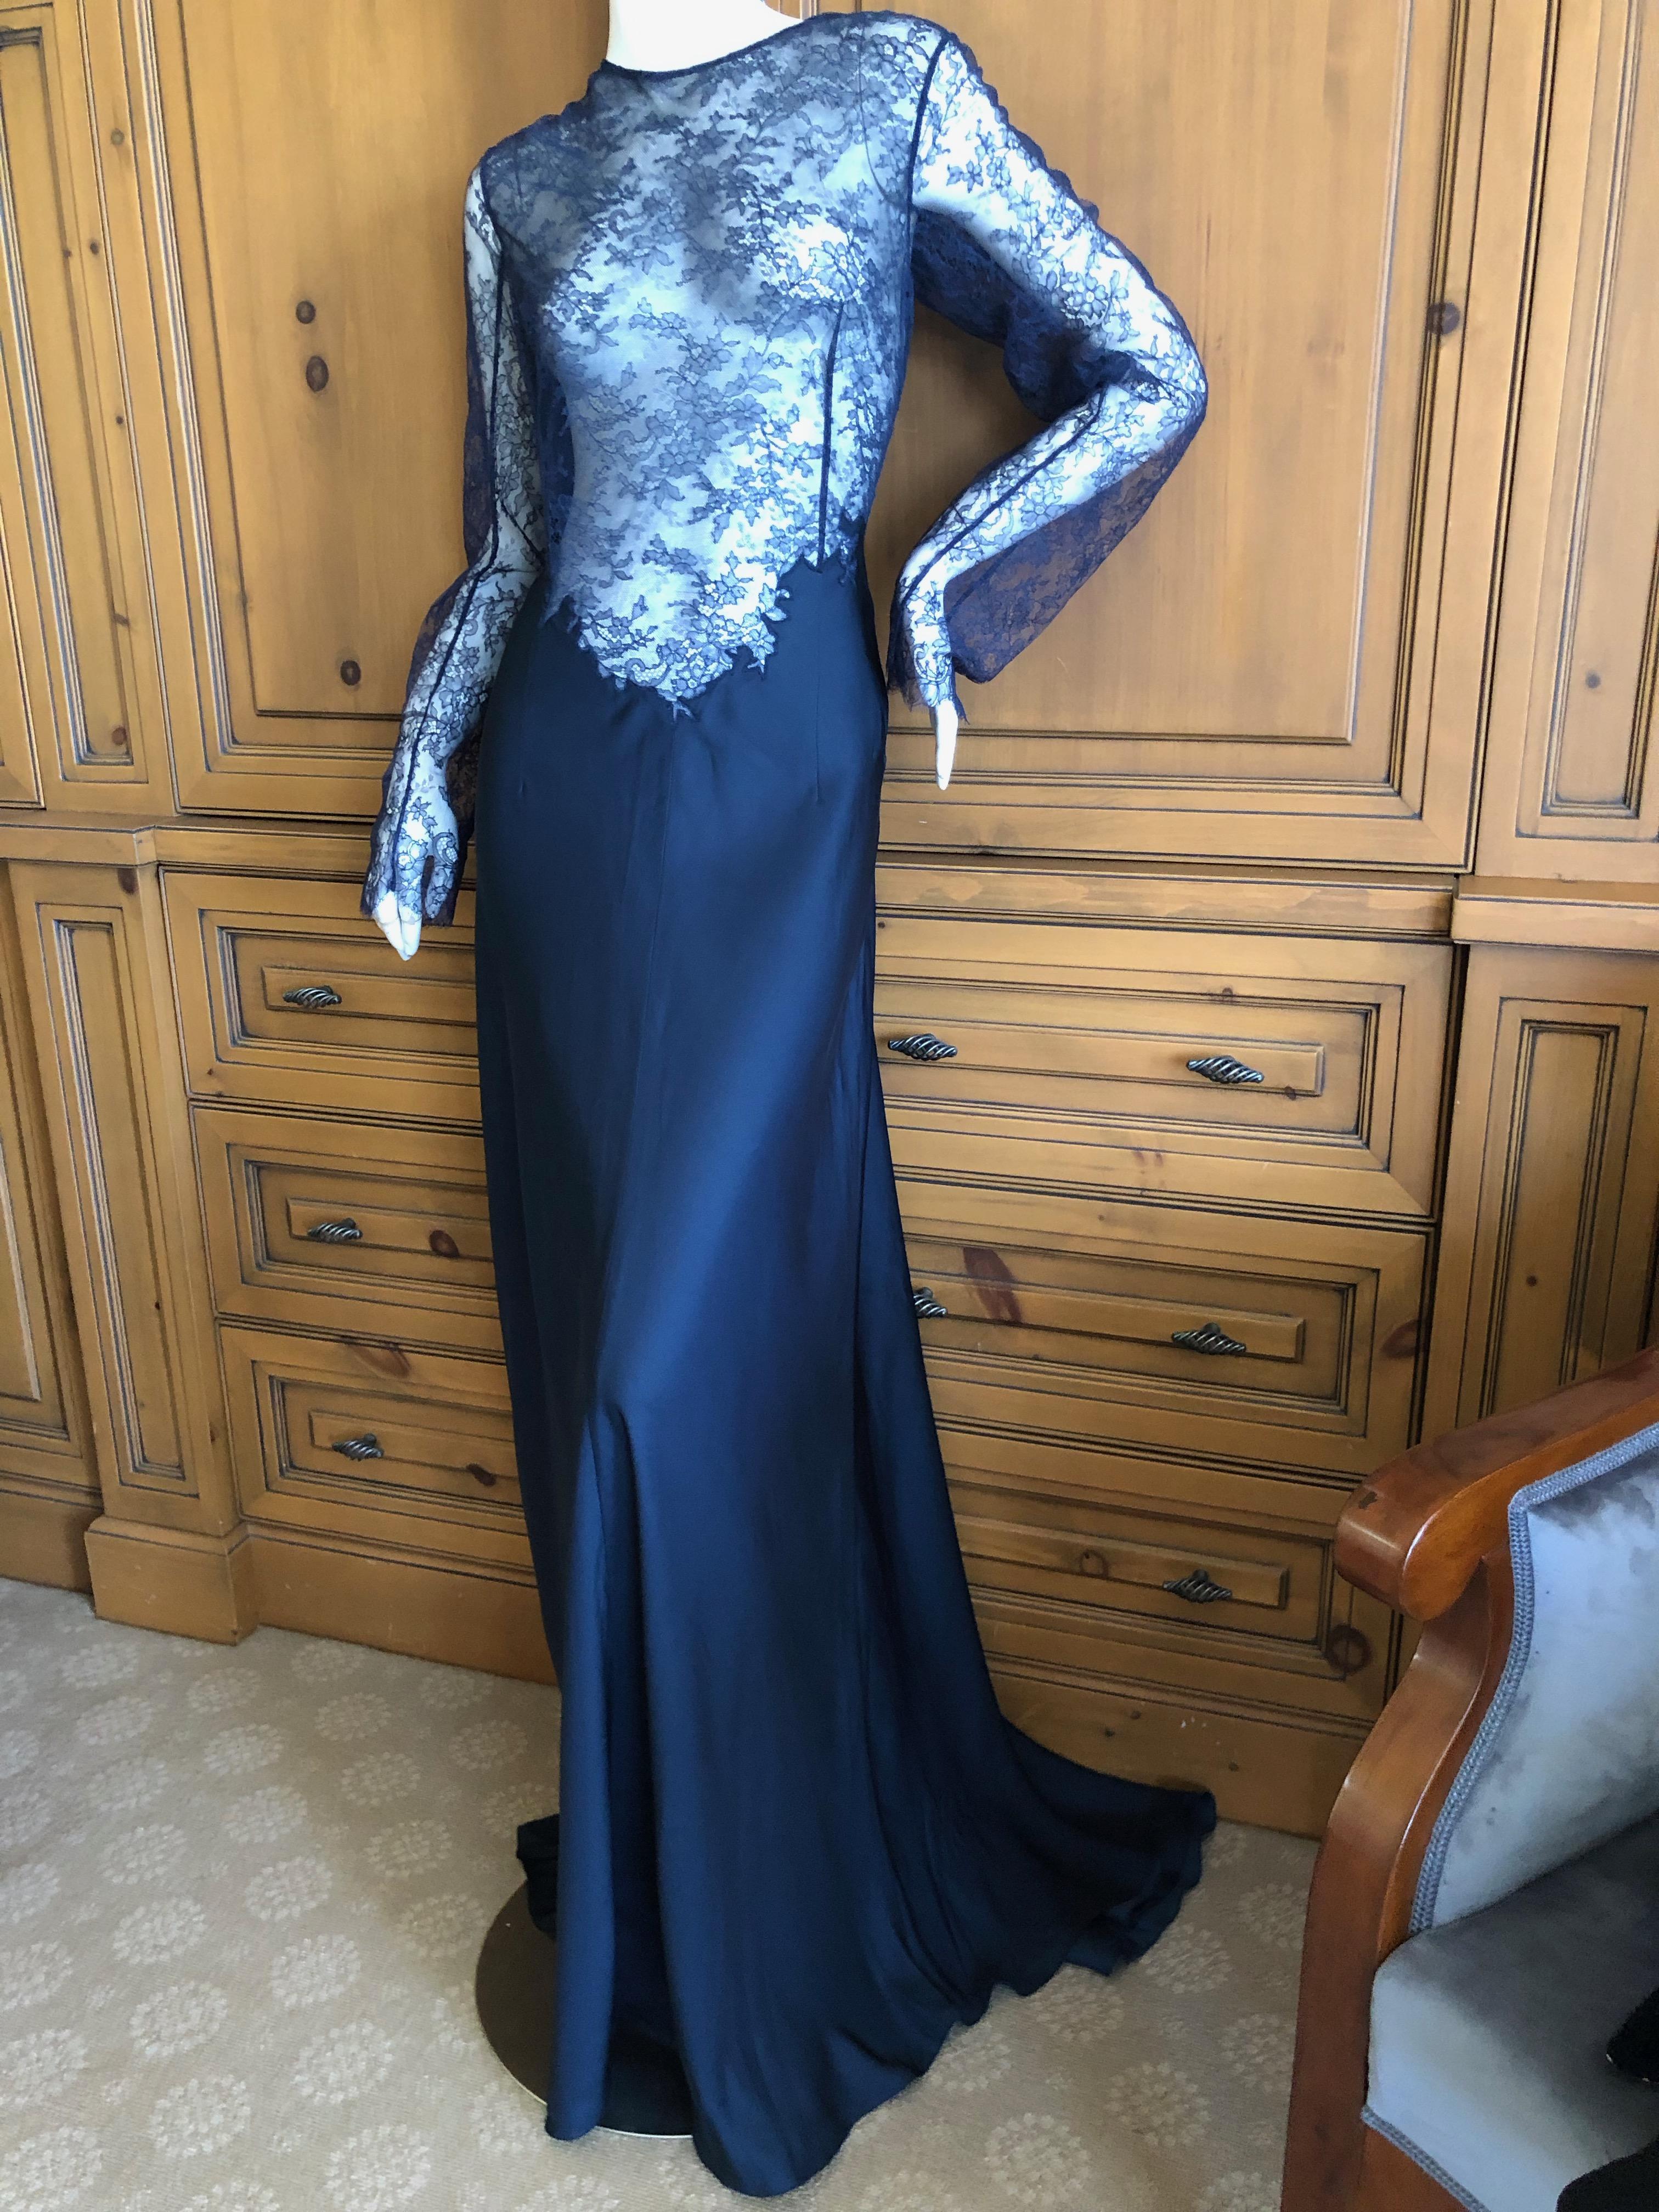 Black Nina Ricci by Peter Copping Navy Blue Sheer Lace Evening Dress with Train